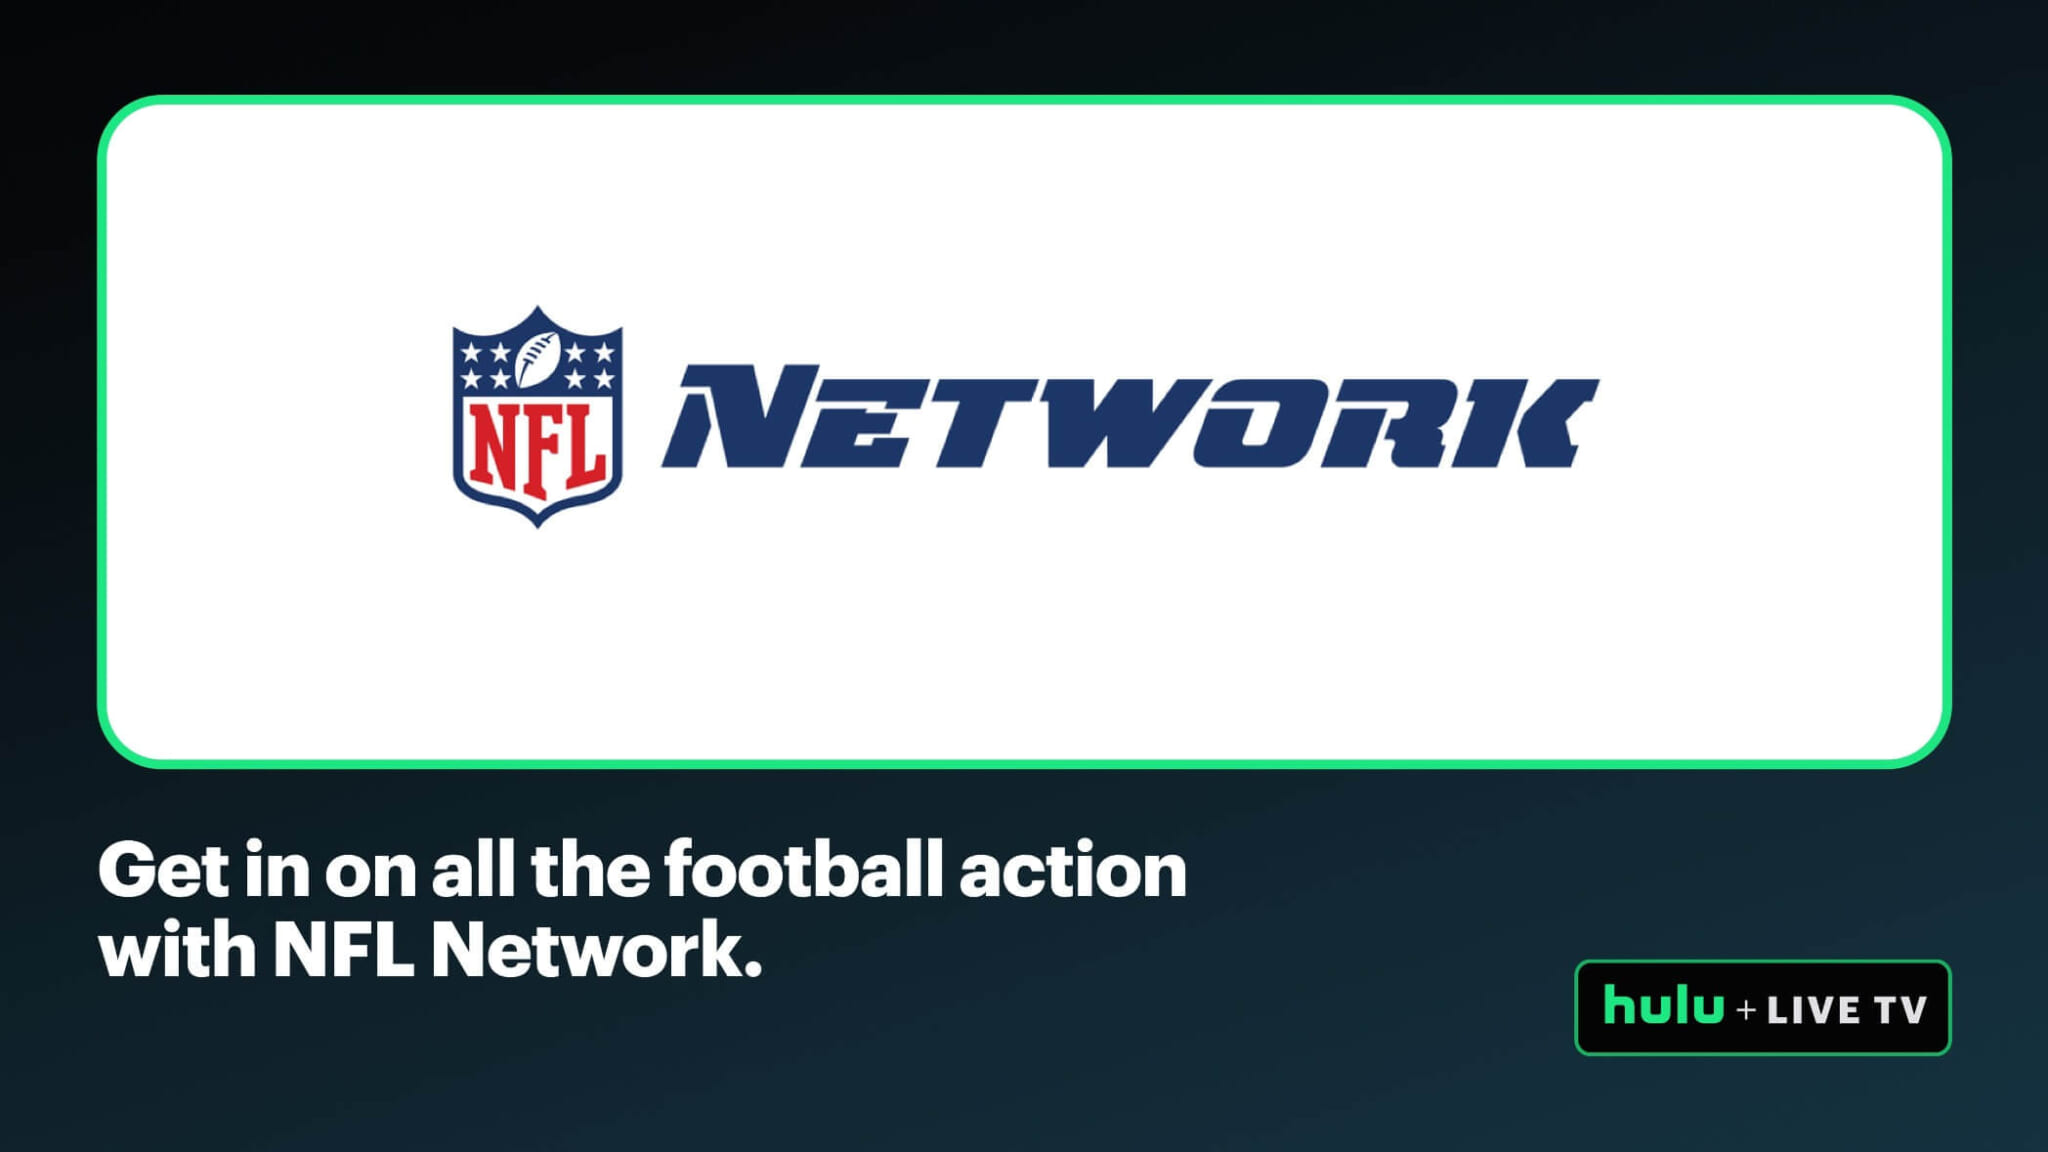 How to Watch the NFL Live on Hulu this Season (2022)